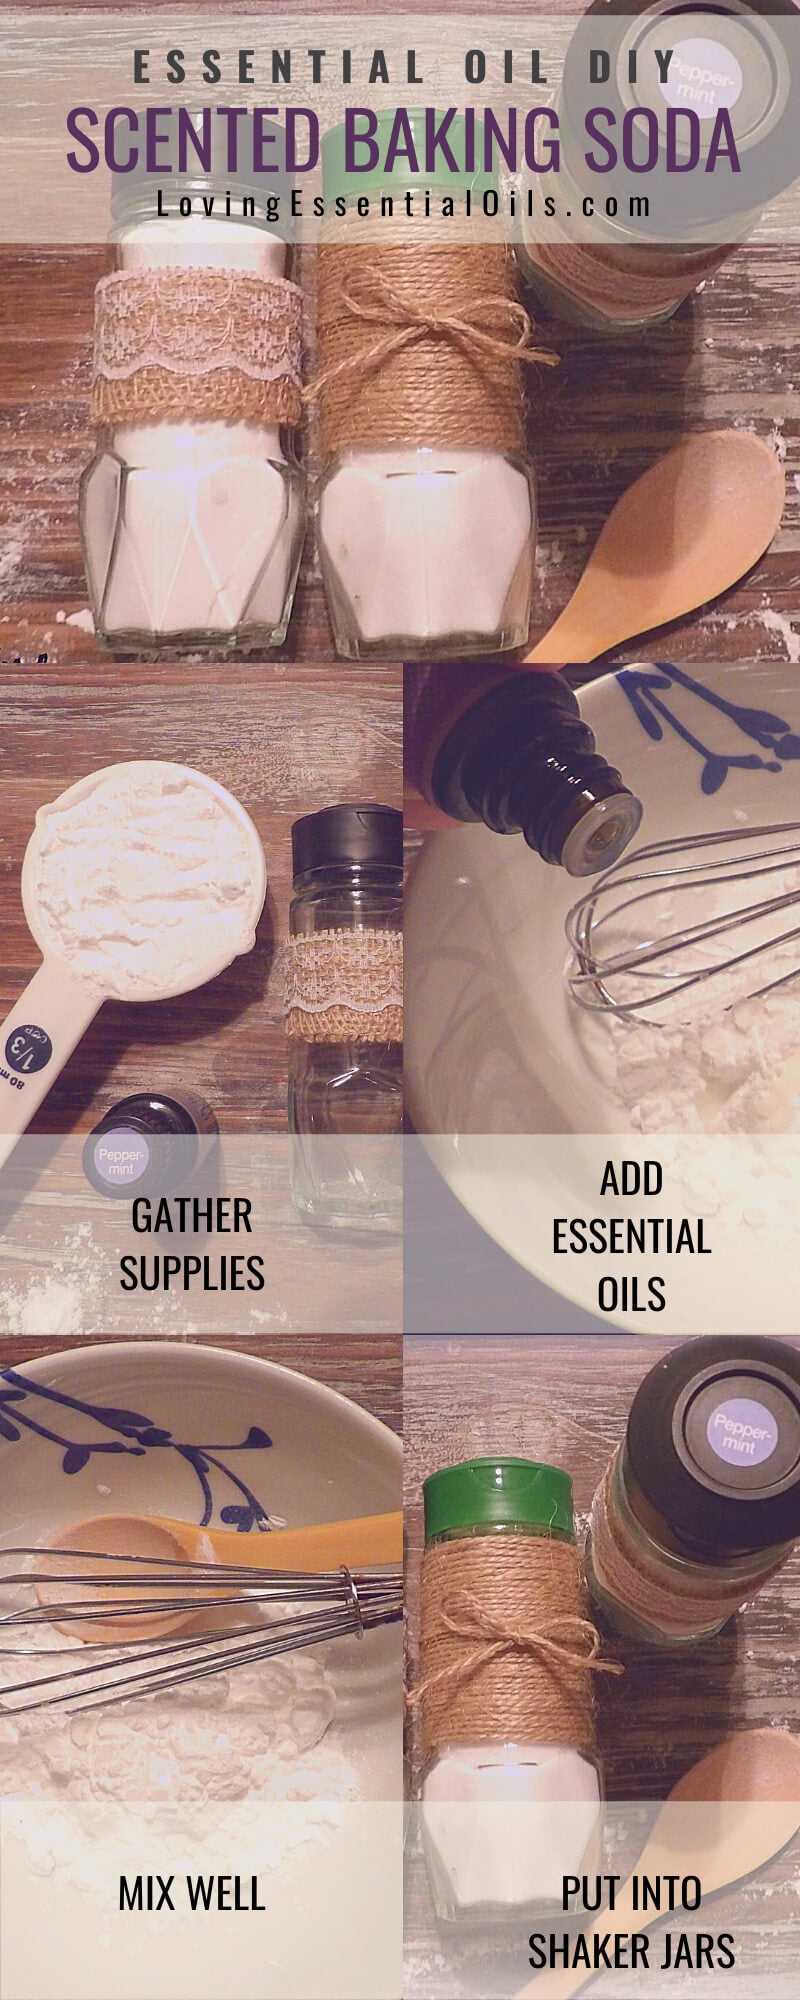 DIY Essential Oil Baking Soda Recipe for Carpets, Air Freshener, Stinky Shoes and More by Loving Essential Oils